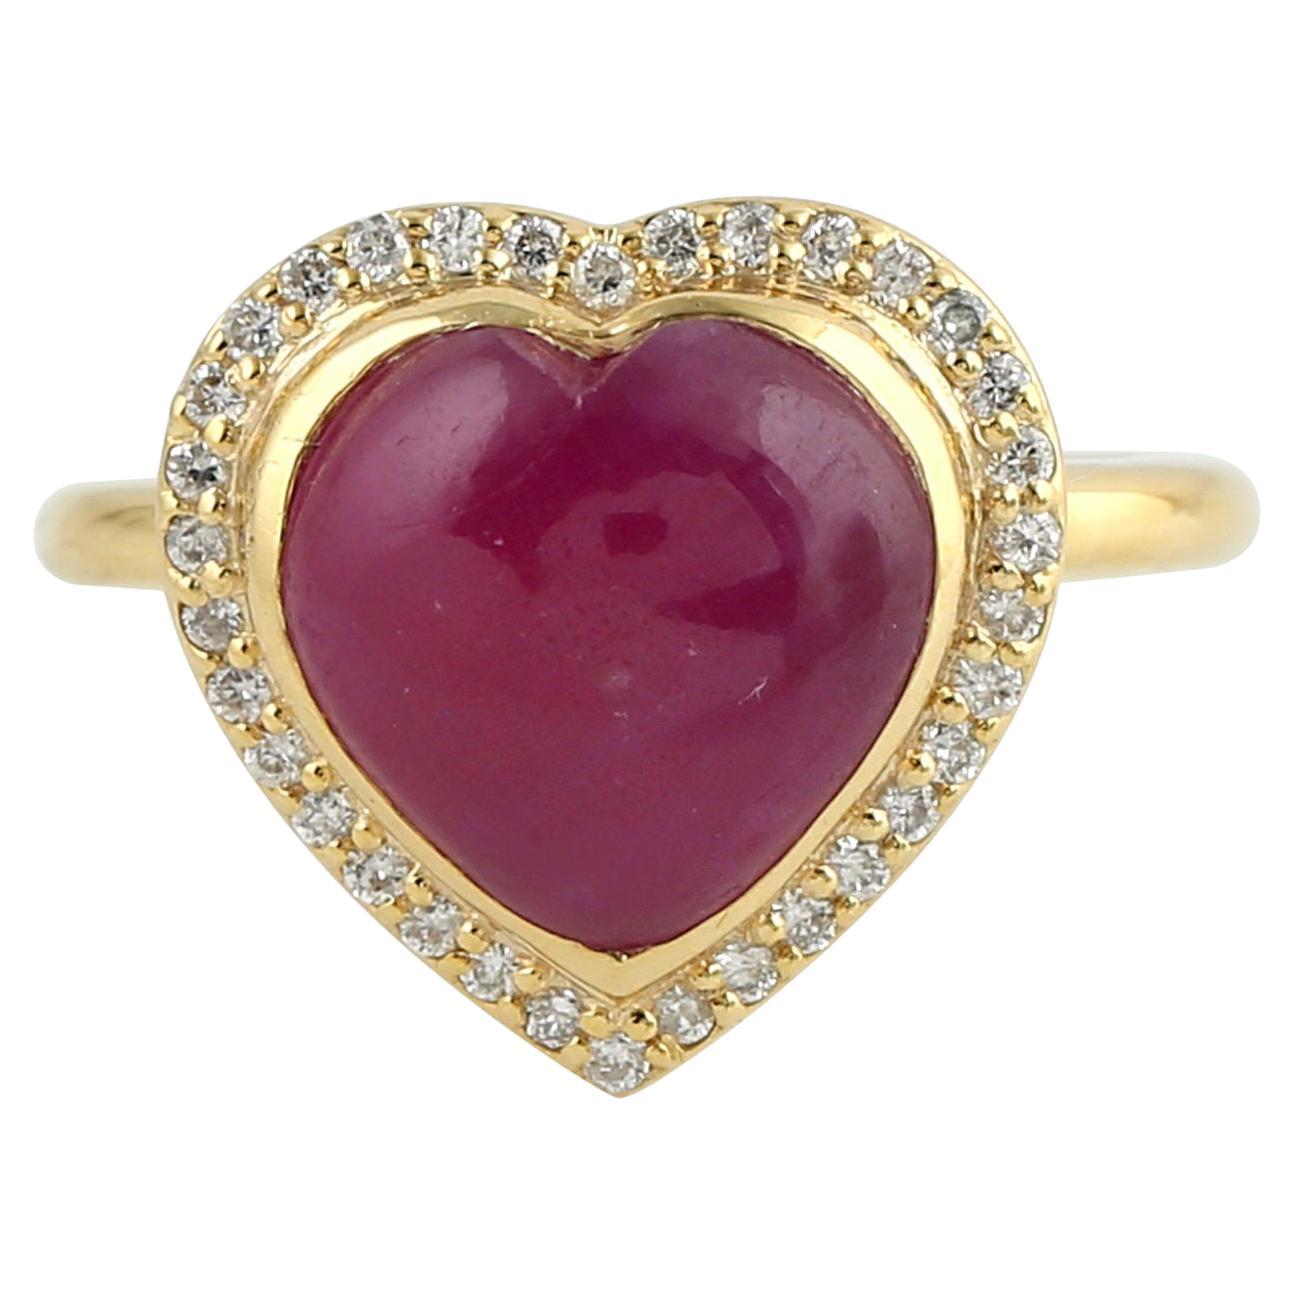 6.41 Ct Heart Shaped Pink Sapphire Cocktail Ring With Diamonds In 18k Gold For Sale